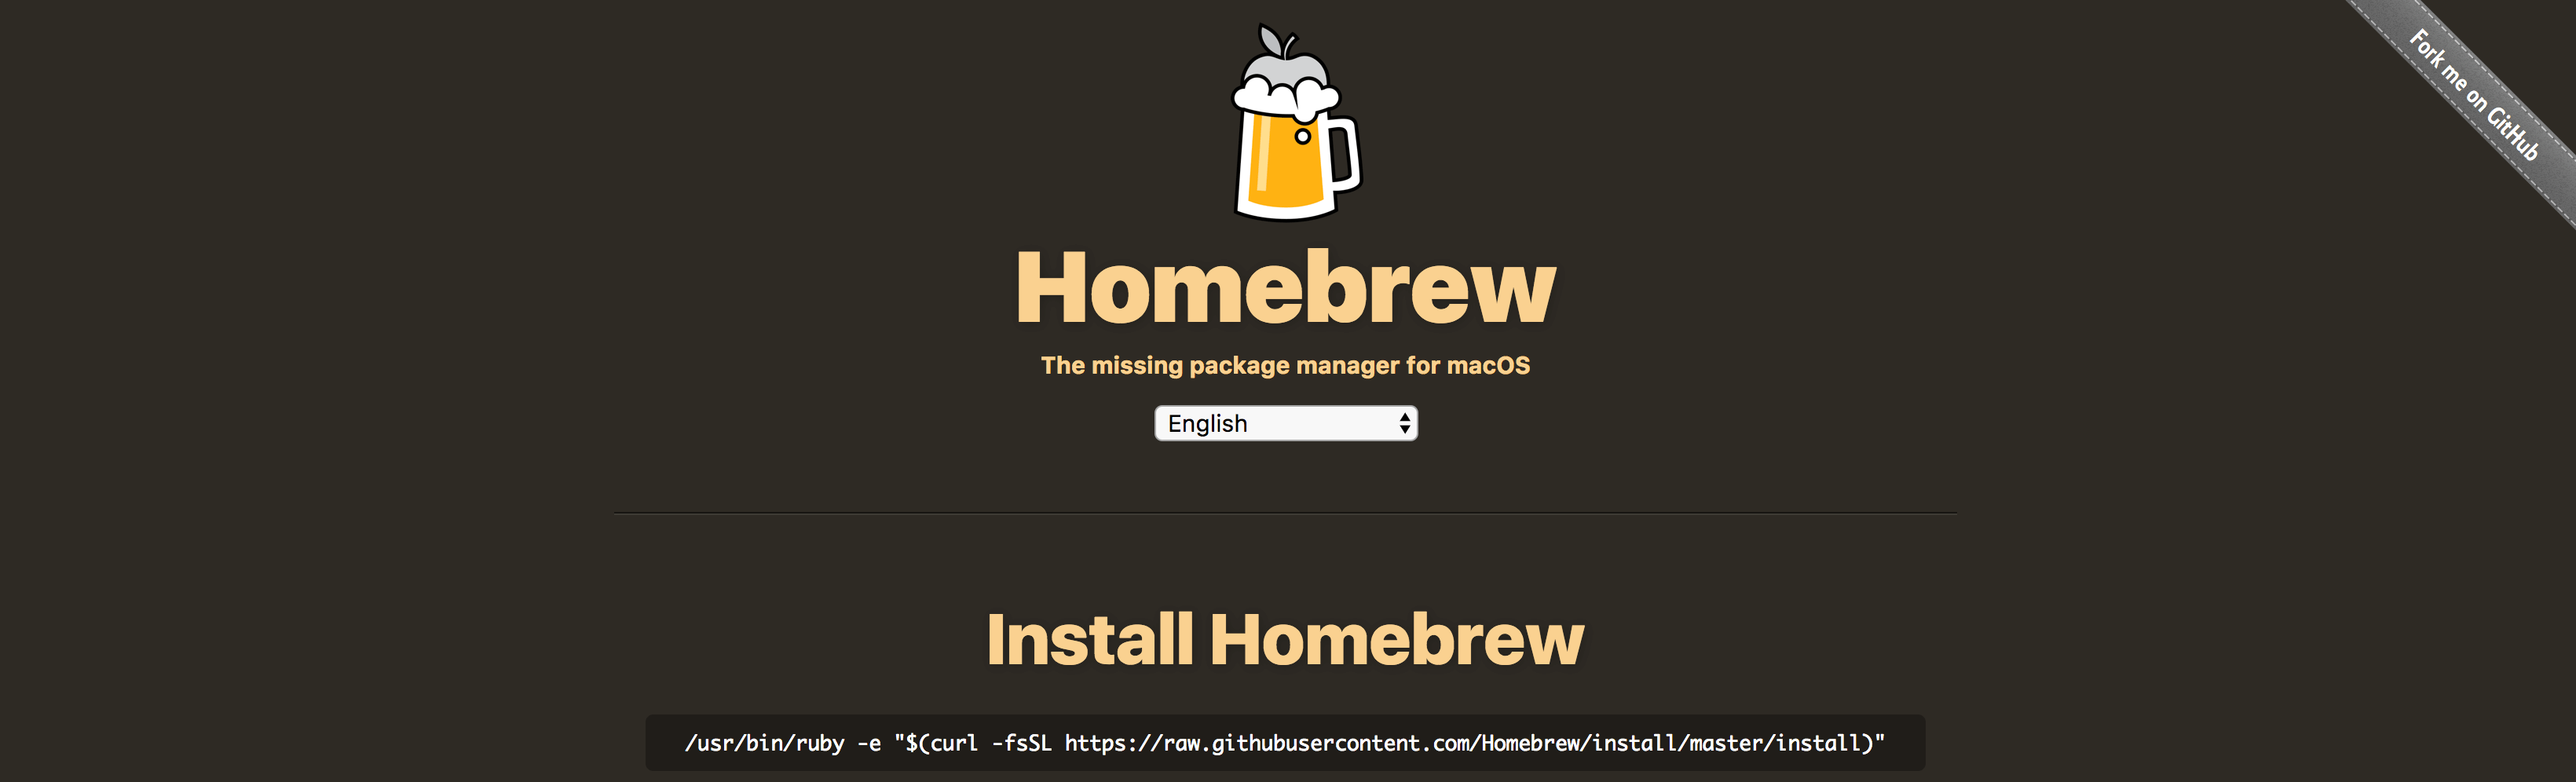 2017/02/getting-started-with-homebrew